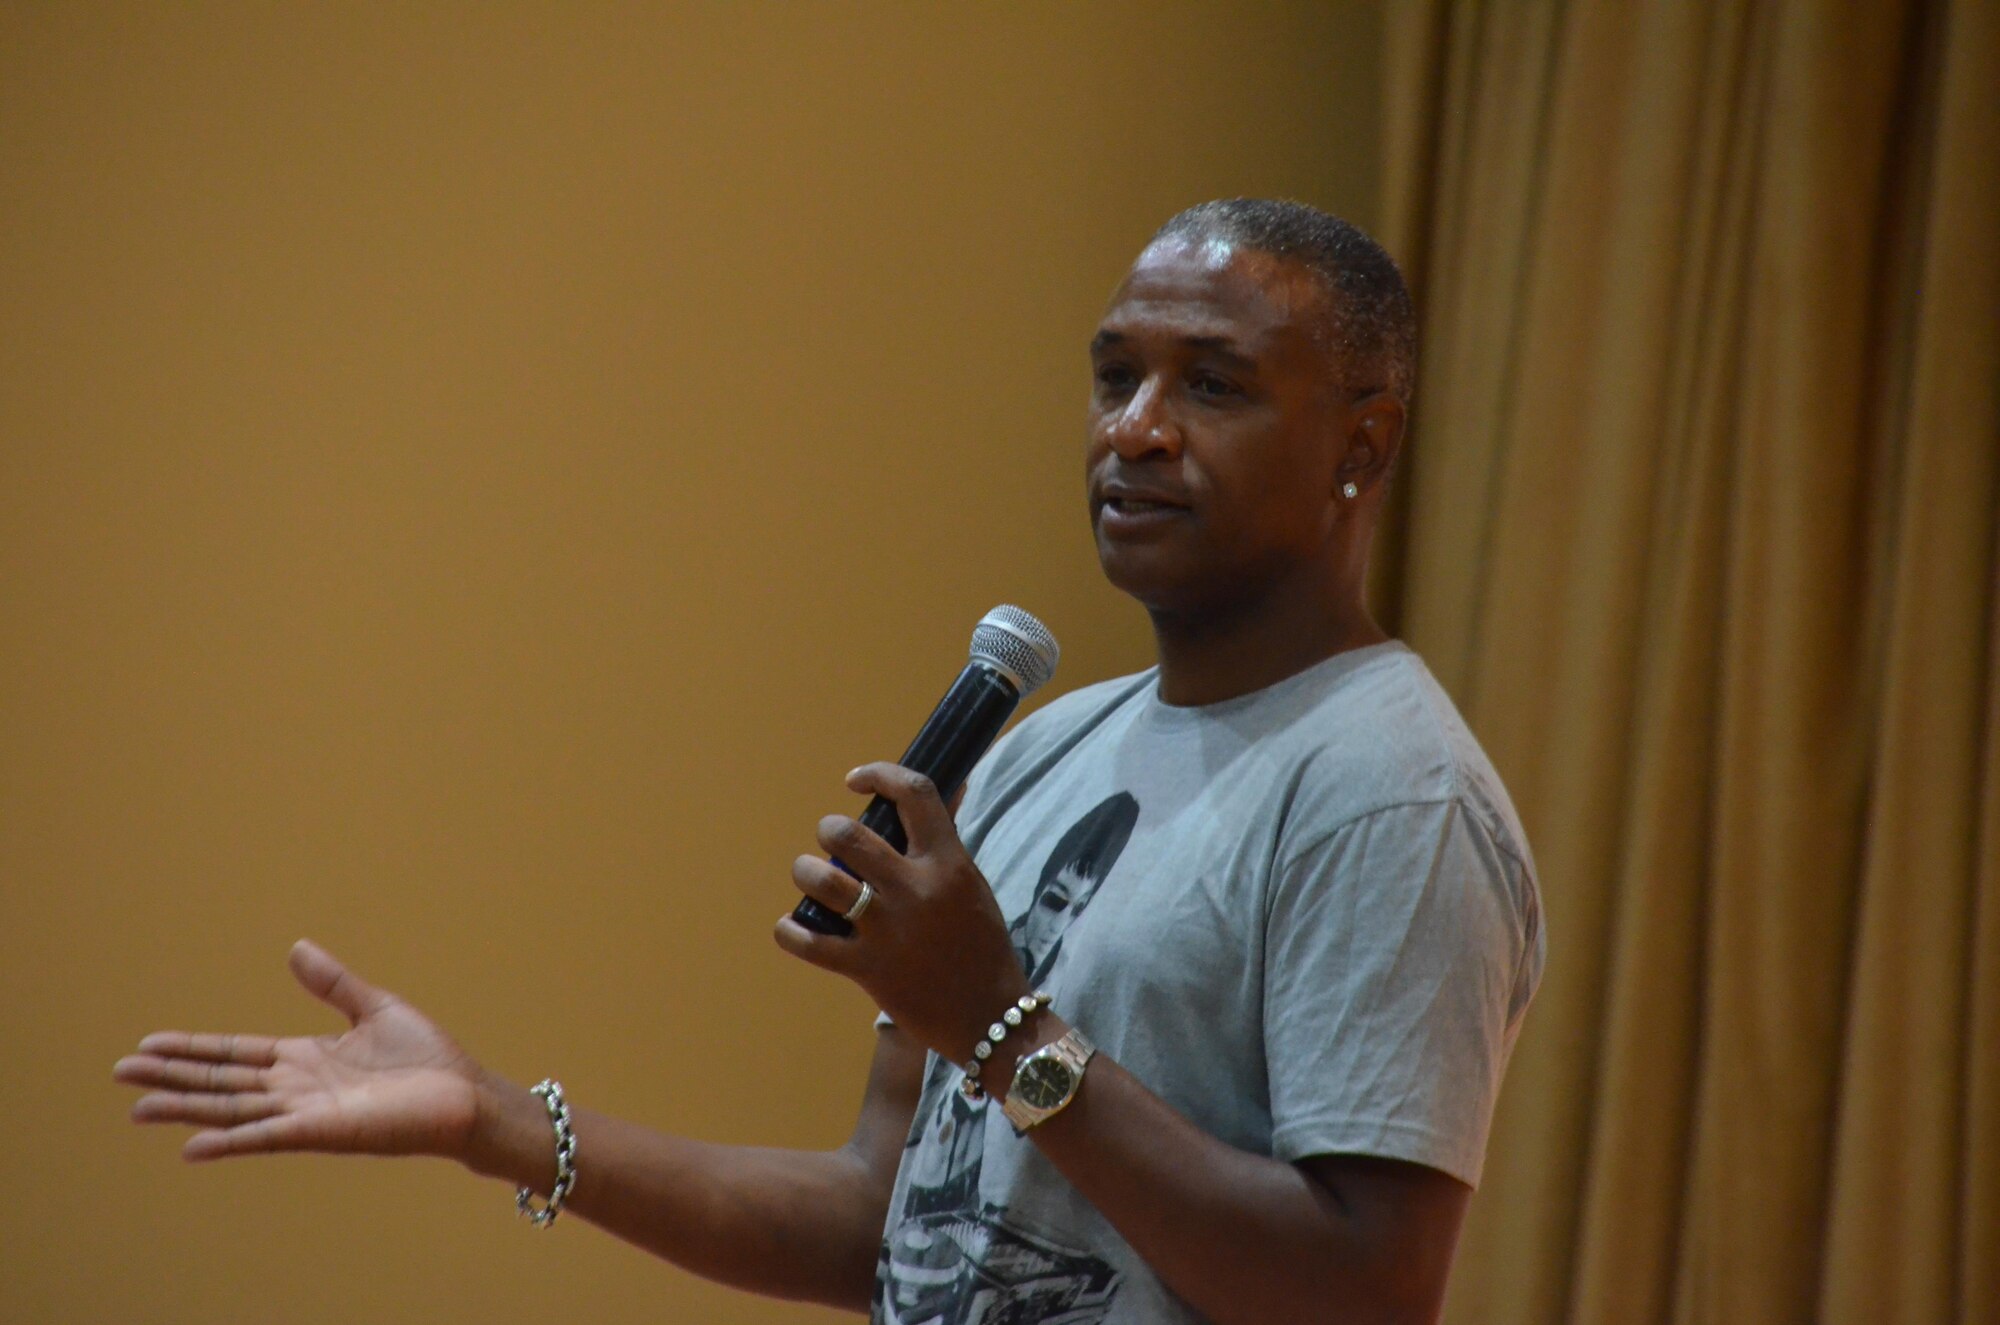 Comedian Tommy Davidson provides his humorous perspectives on shopping, 24-hour television, and more, during his performance at the Rock Theater, Aug. 13. (US Air Force photo/Master Sgt. Andrew Biscoe)